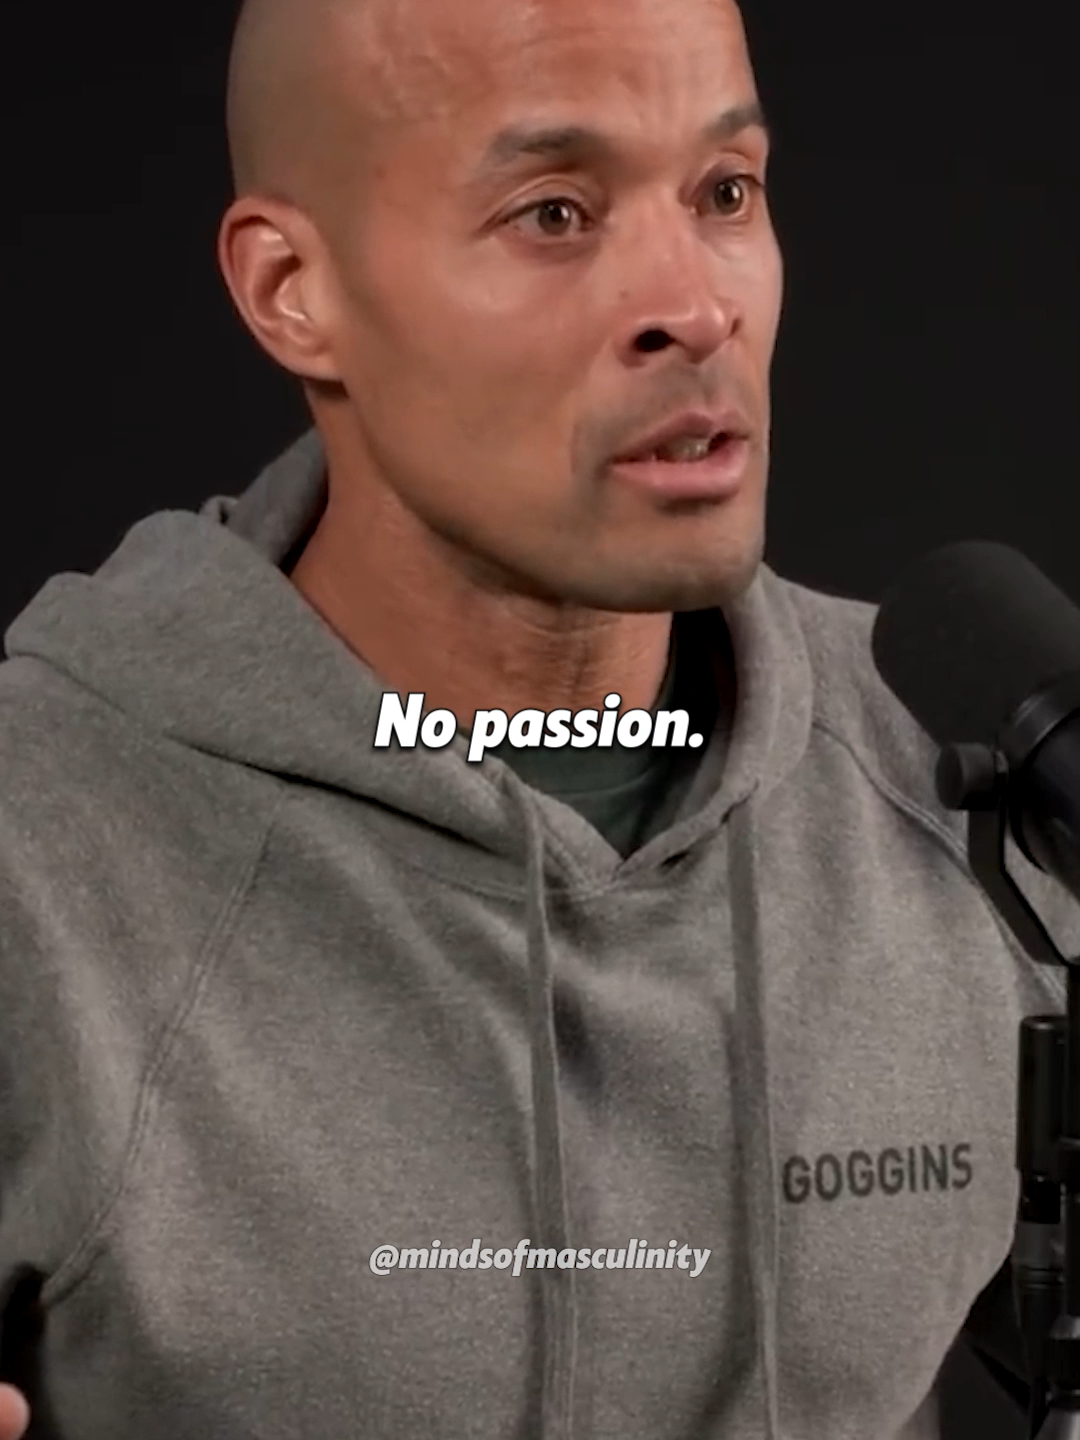 How Do You Want To Be Remembered? | David Goggins